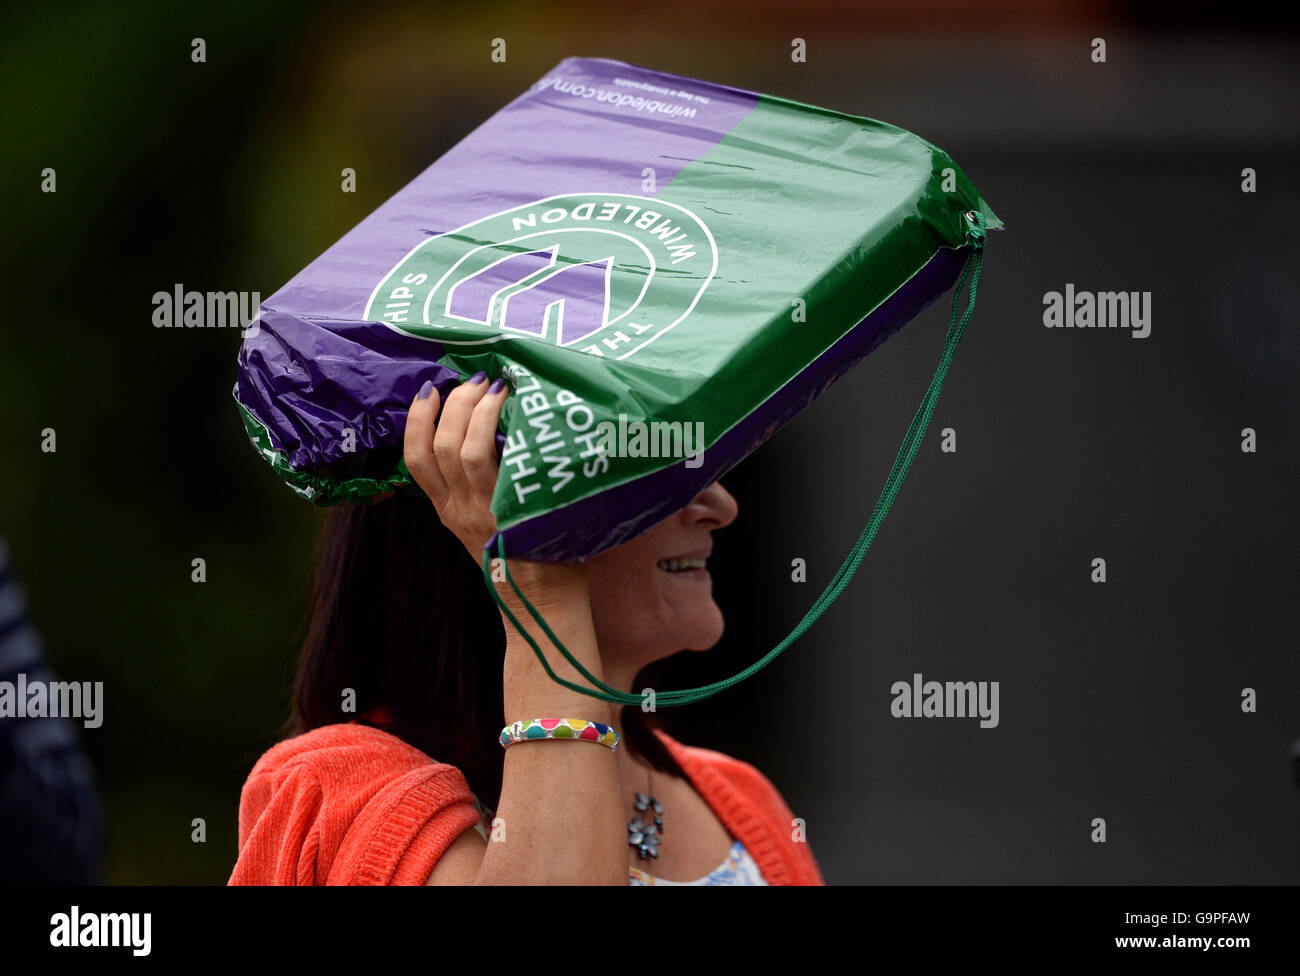 A spectator uses a Wimbledon branded plastic bag to shelter from the rain on day Five of the Wimbledon Championships at the All England Lawn Tennis and Croquet Club, Wimbledon. Stock Photo